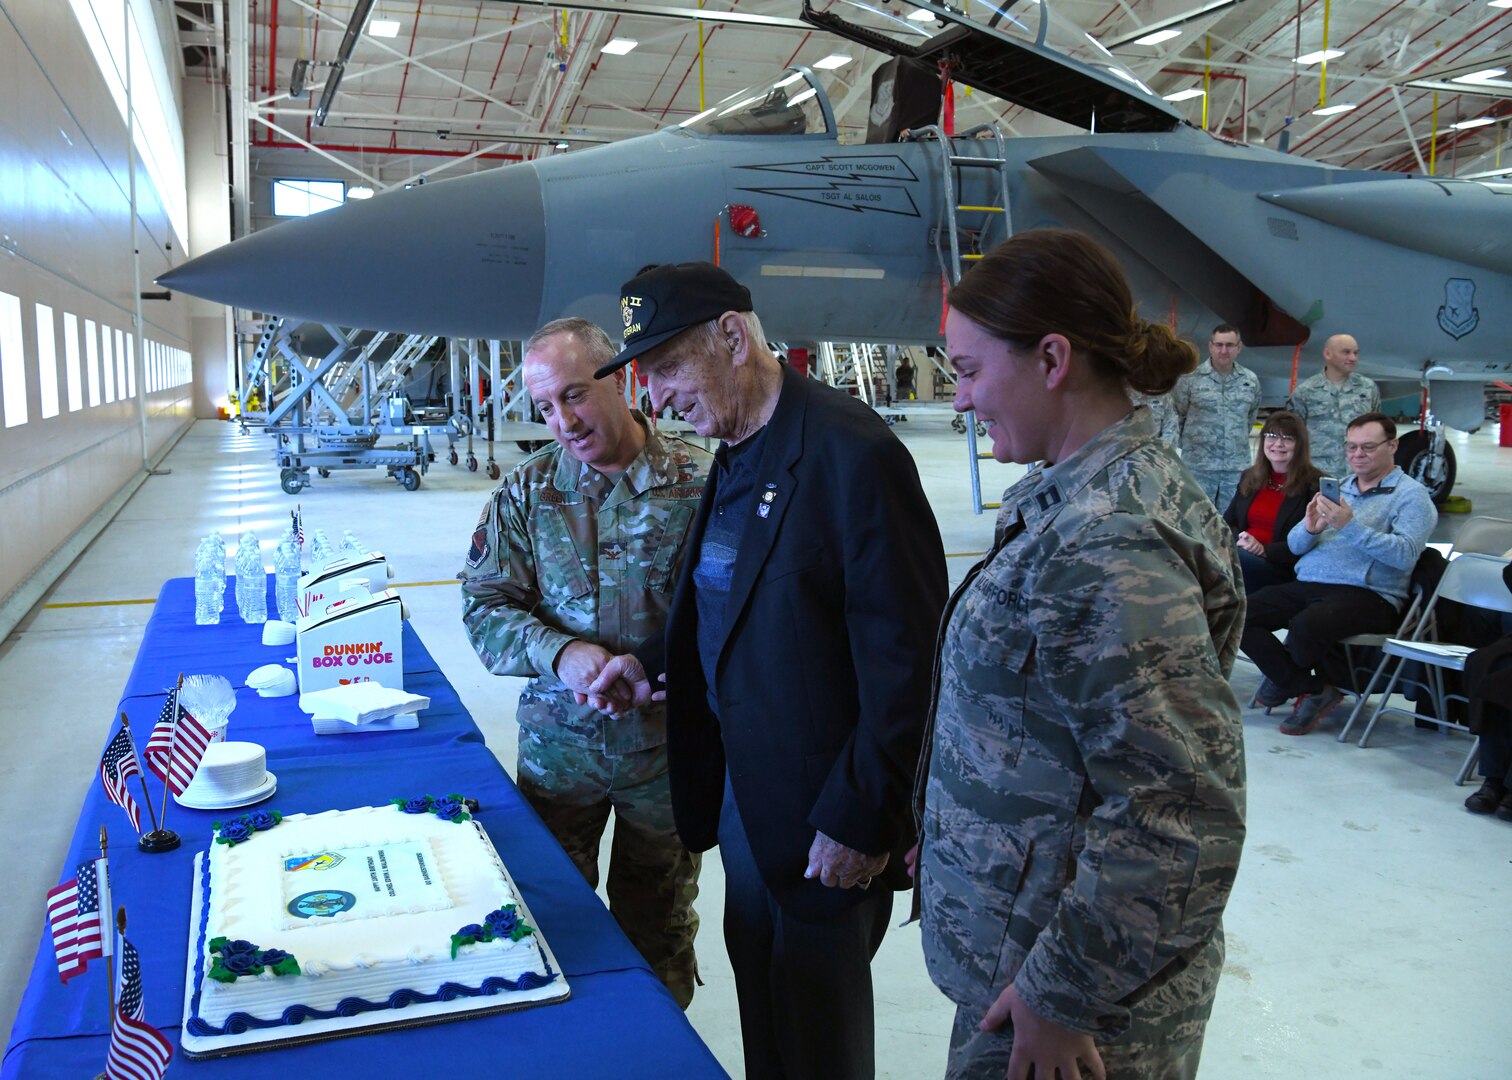 The 104th Fighter Wing threw a surprise birthday for retired Col. Edwin J. Malikowski on Nov. 25, 2019, four days before he turns 100. Malikowski spent 39 years in the Army and Air National Guard.